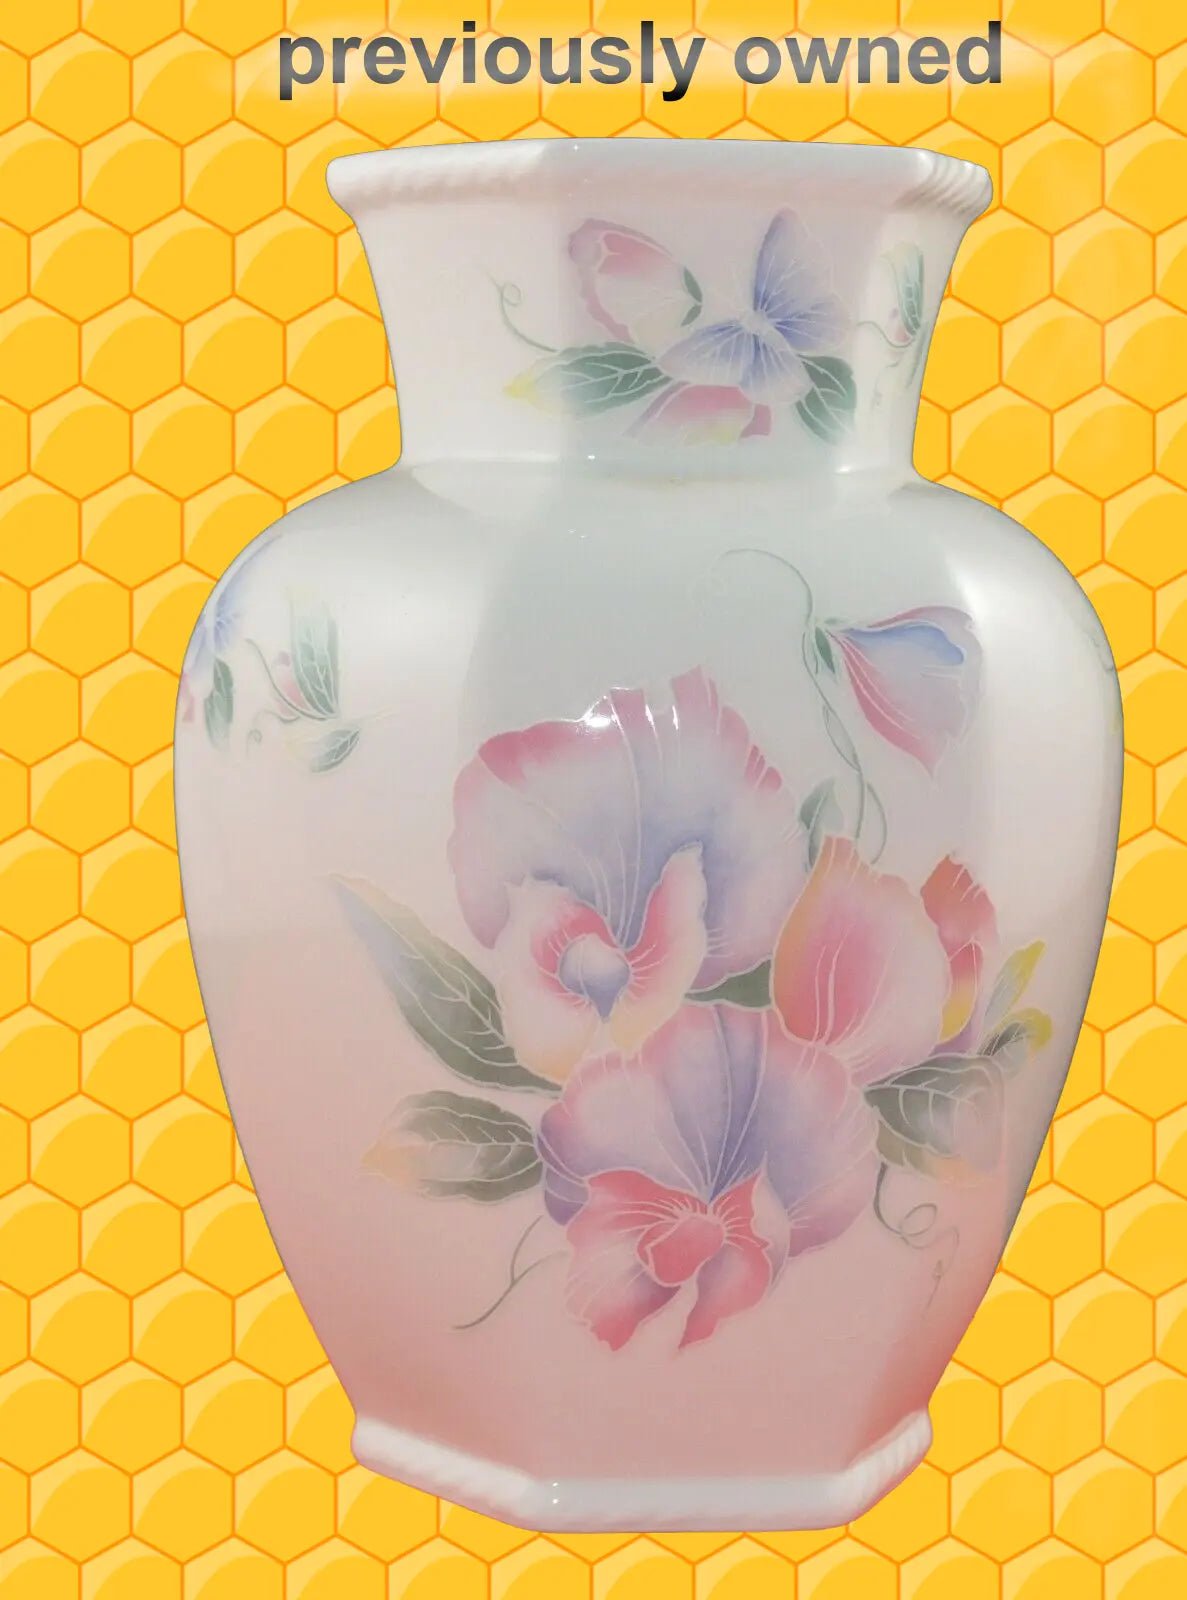 AYNSLEY HEXAGON SHAPED VASE(PREVIOUSLY OWNED) VERY GOOD CONDITION - TMD167207